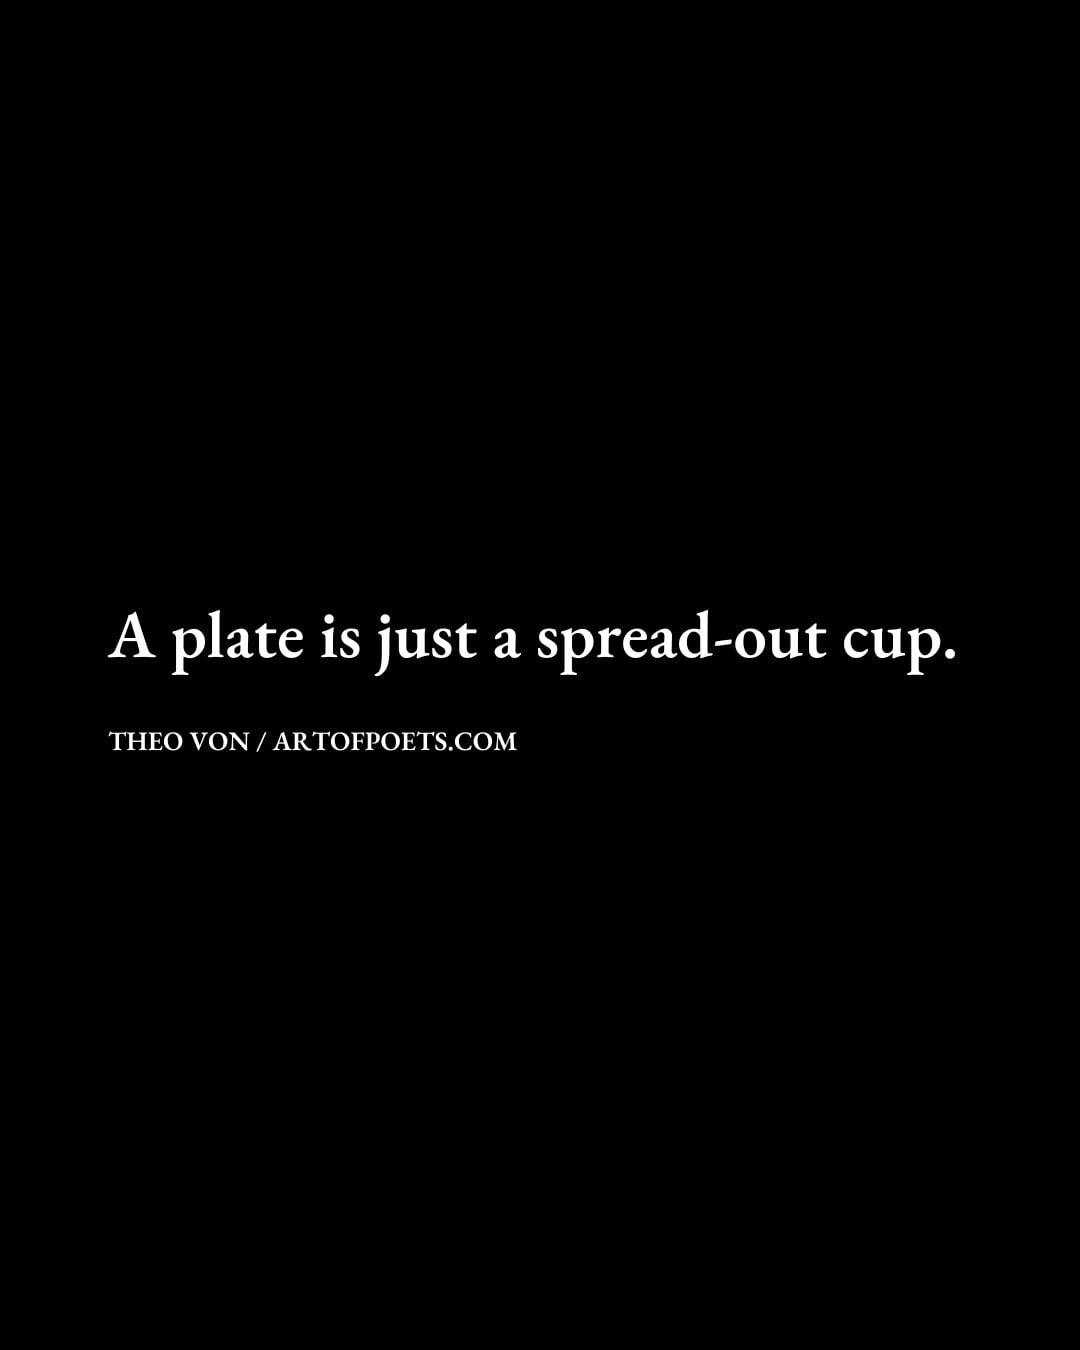 A plate is just a spread out cup